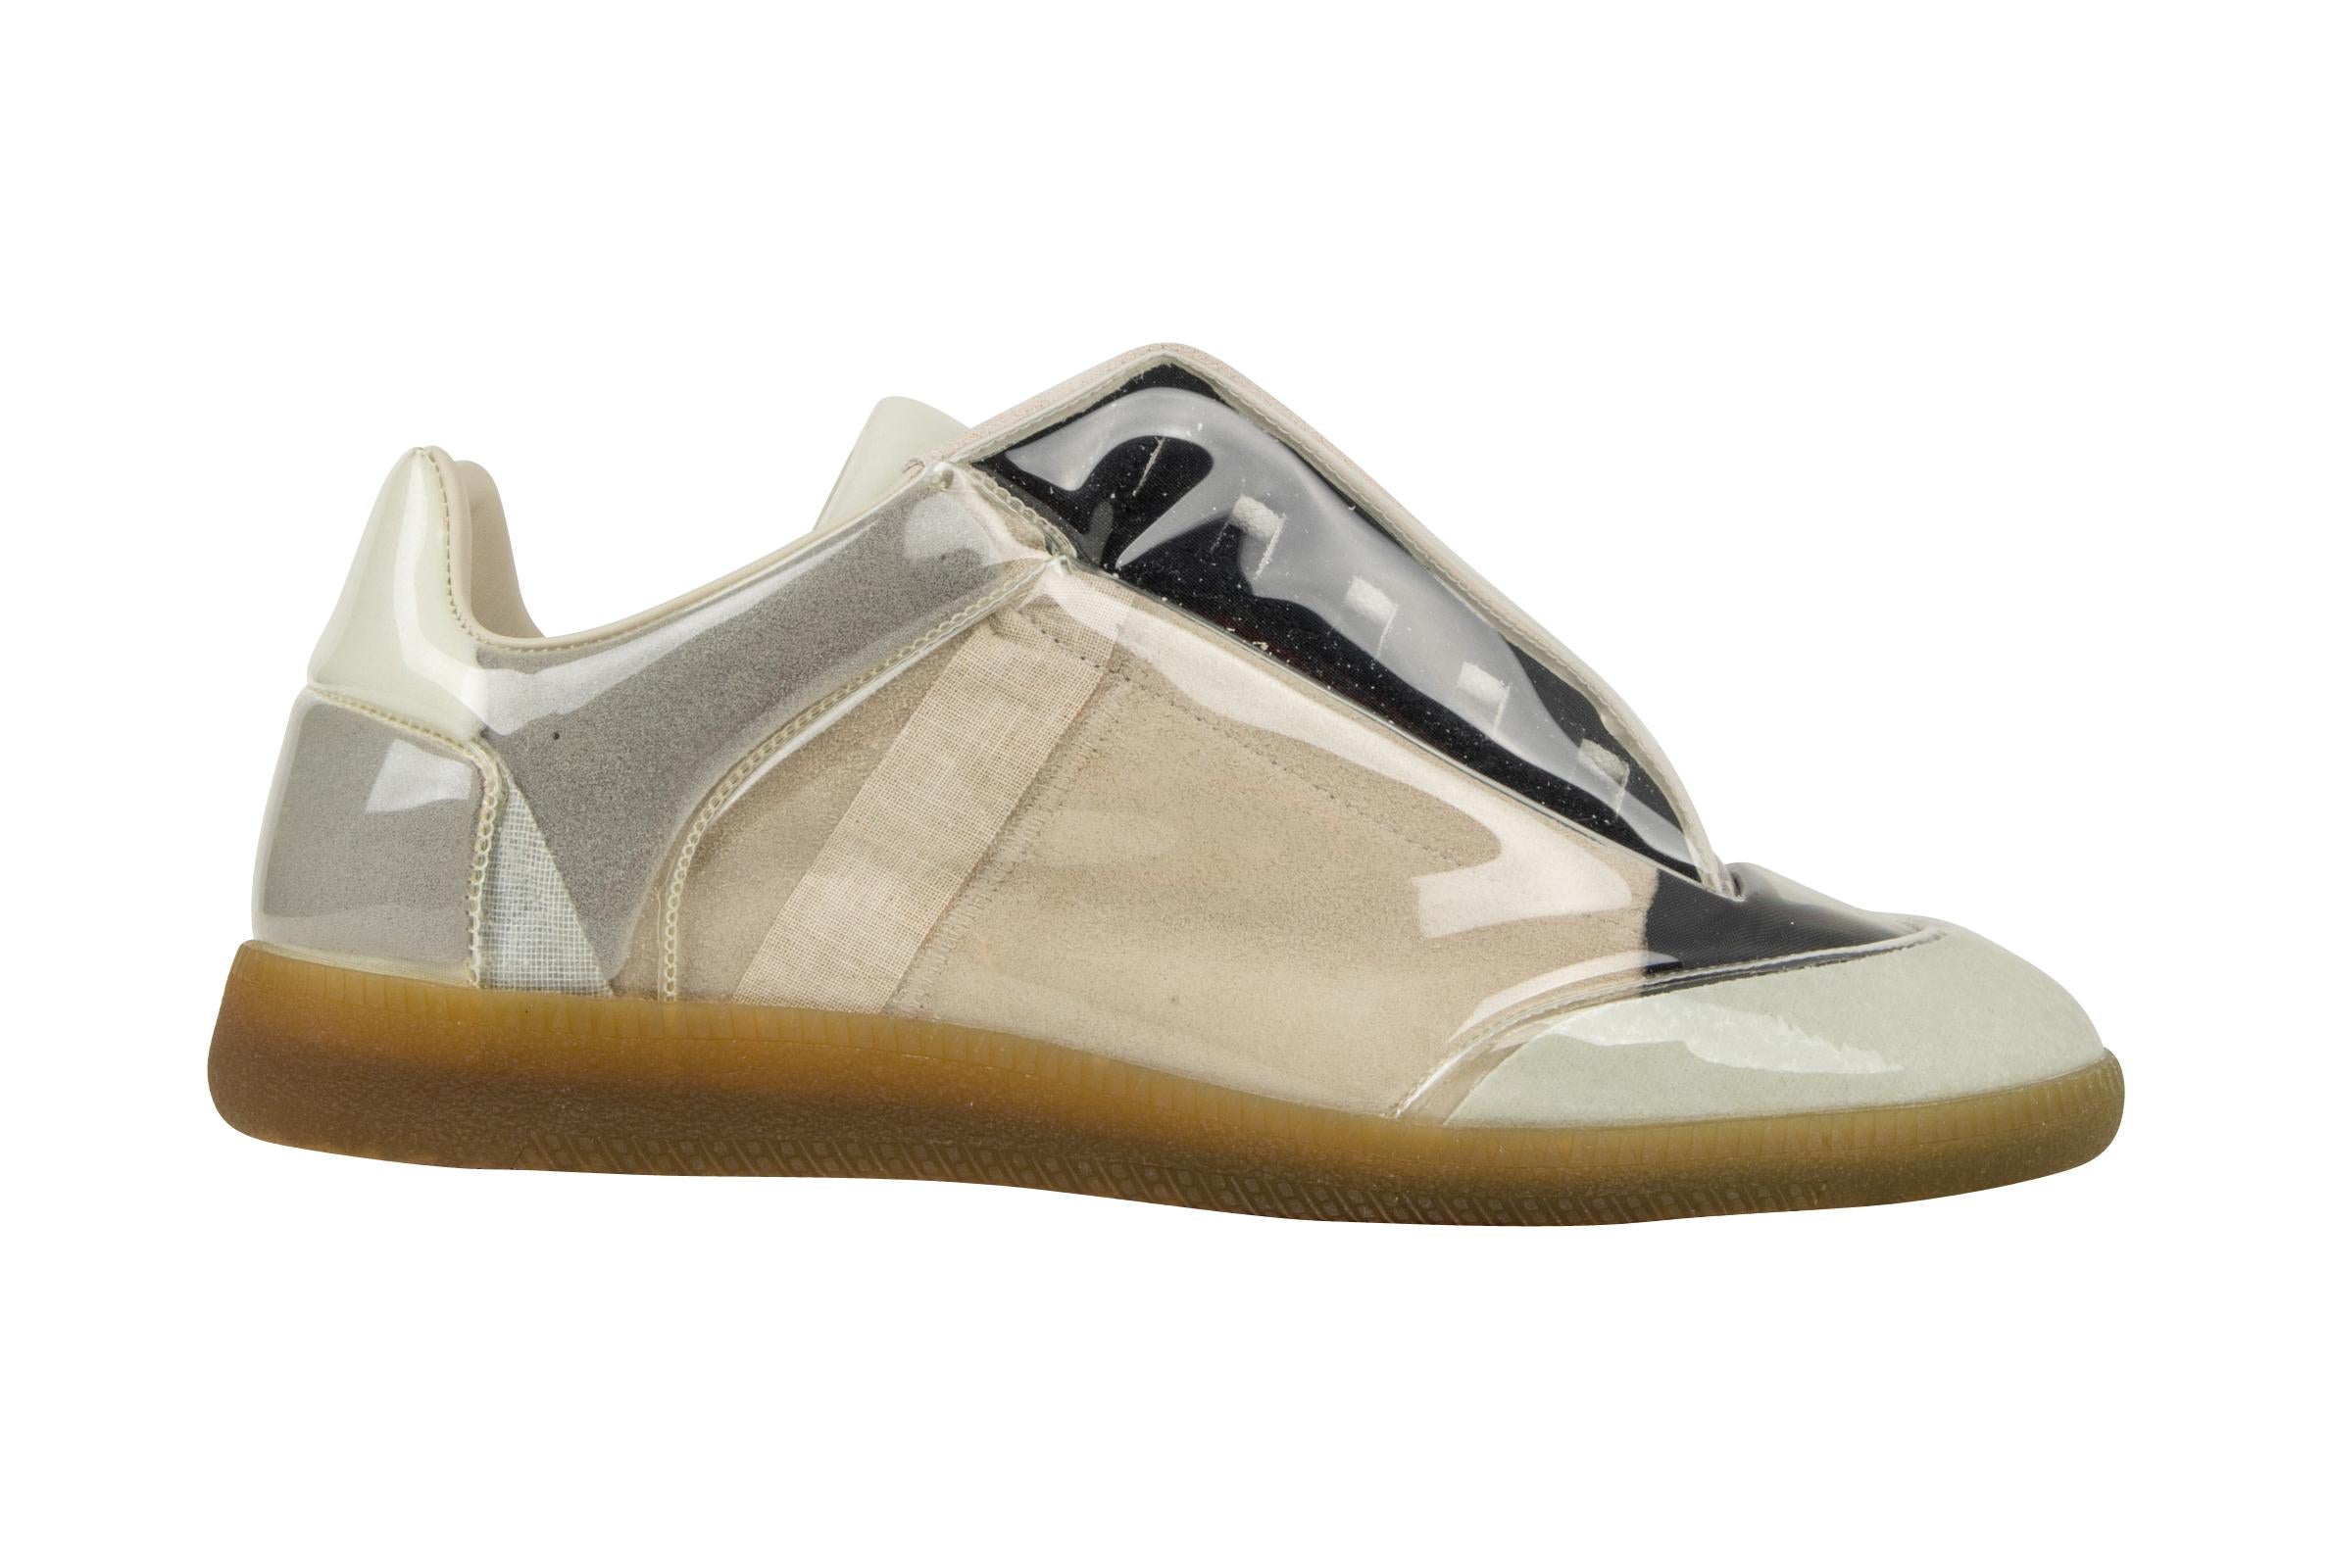 Guaranteed authentic Maison Martin Margiela men's sneaker.
Rare to find this fabulous Maison Martin Margiela sneaker is perfect for year round wear!
Gray, beige and navy suede and leather with PVC cover.
New or Never Worn.   
final sale

SIZE  43